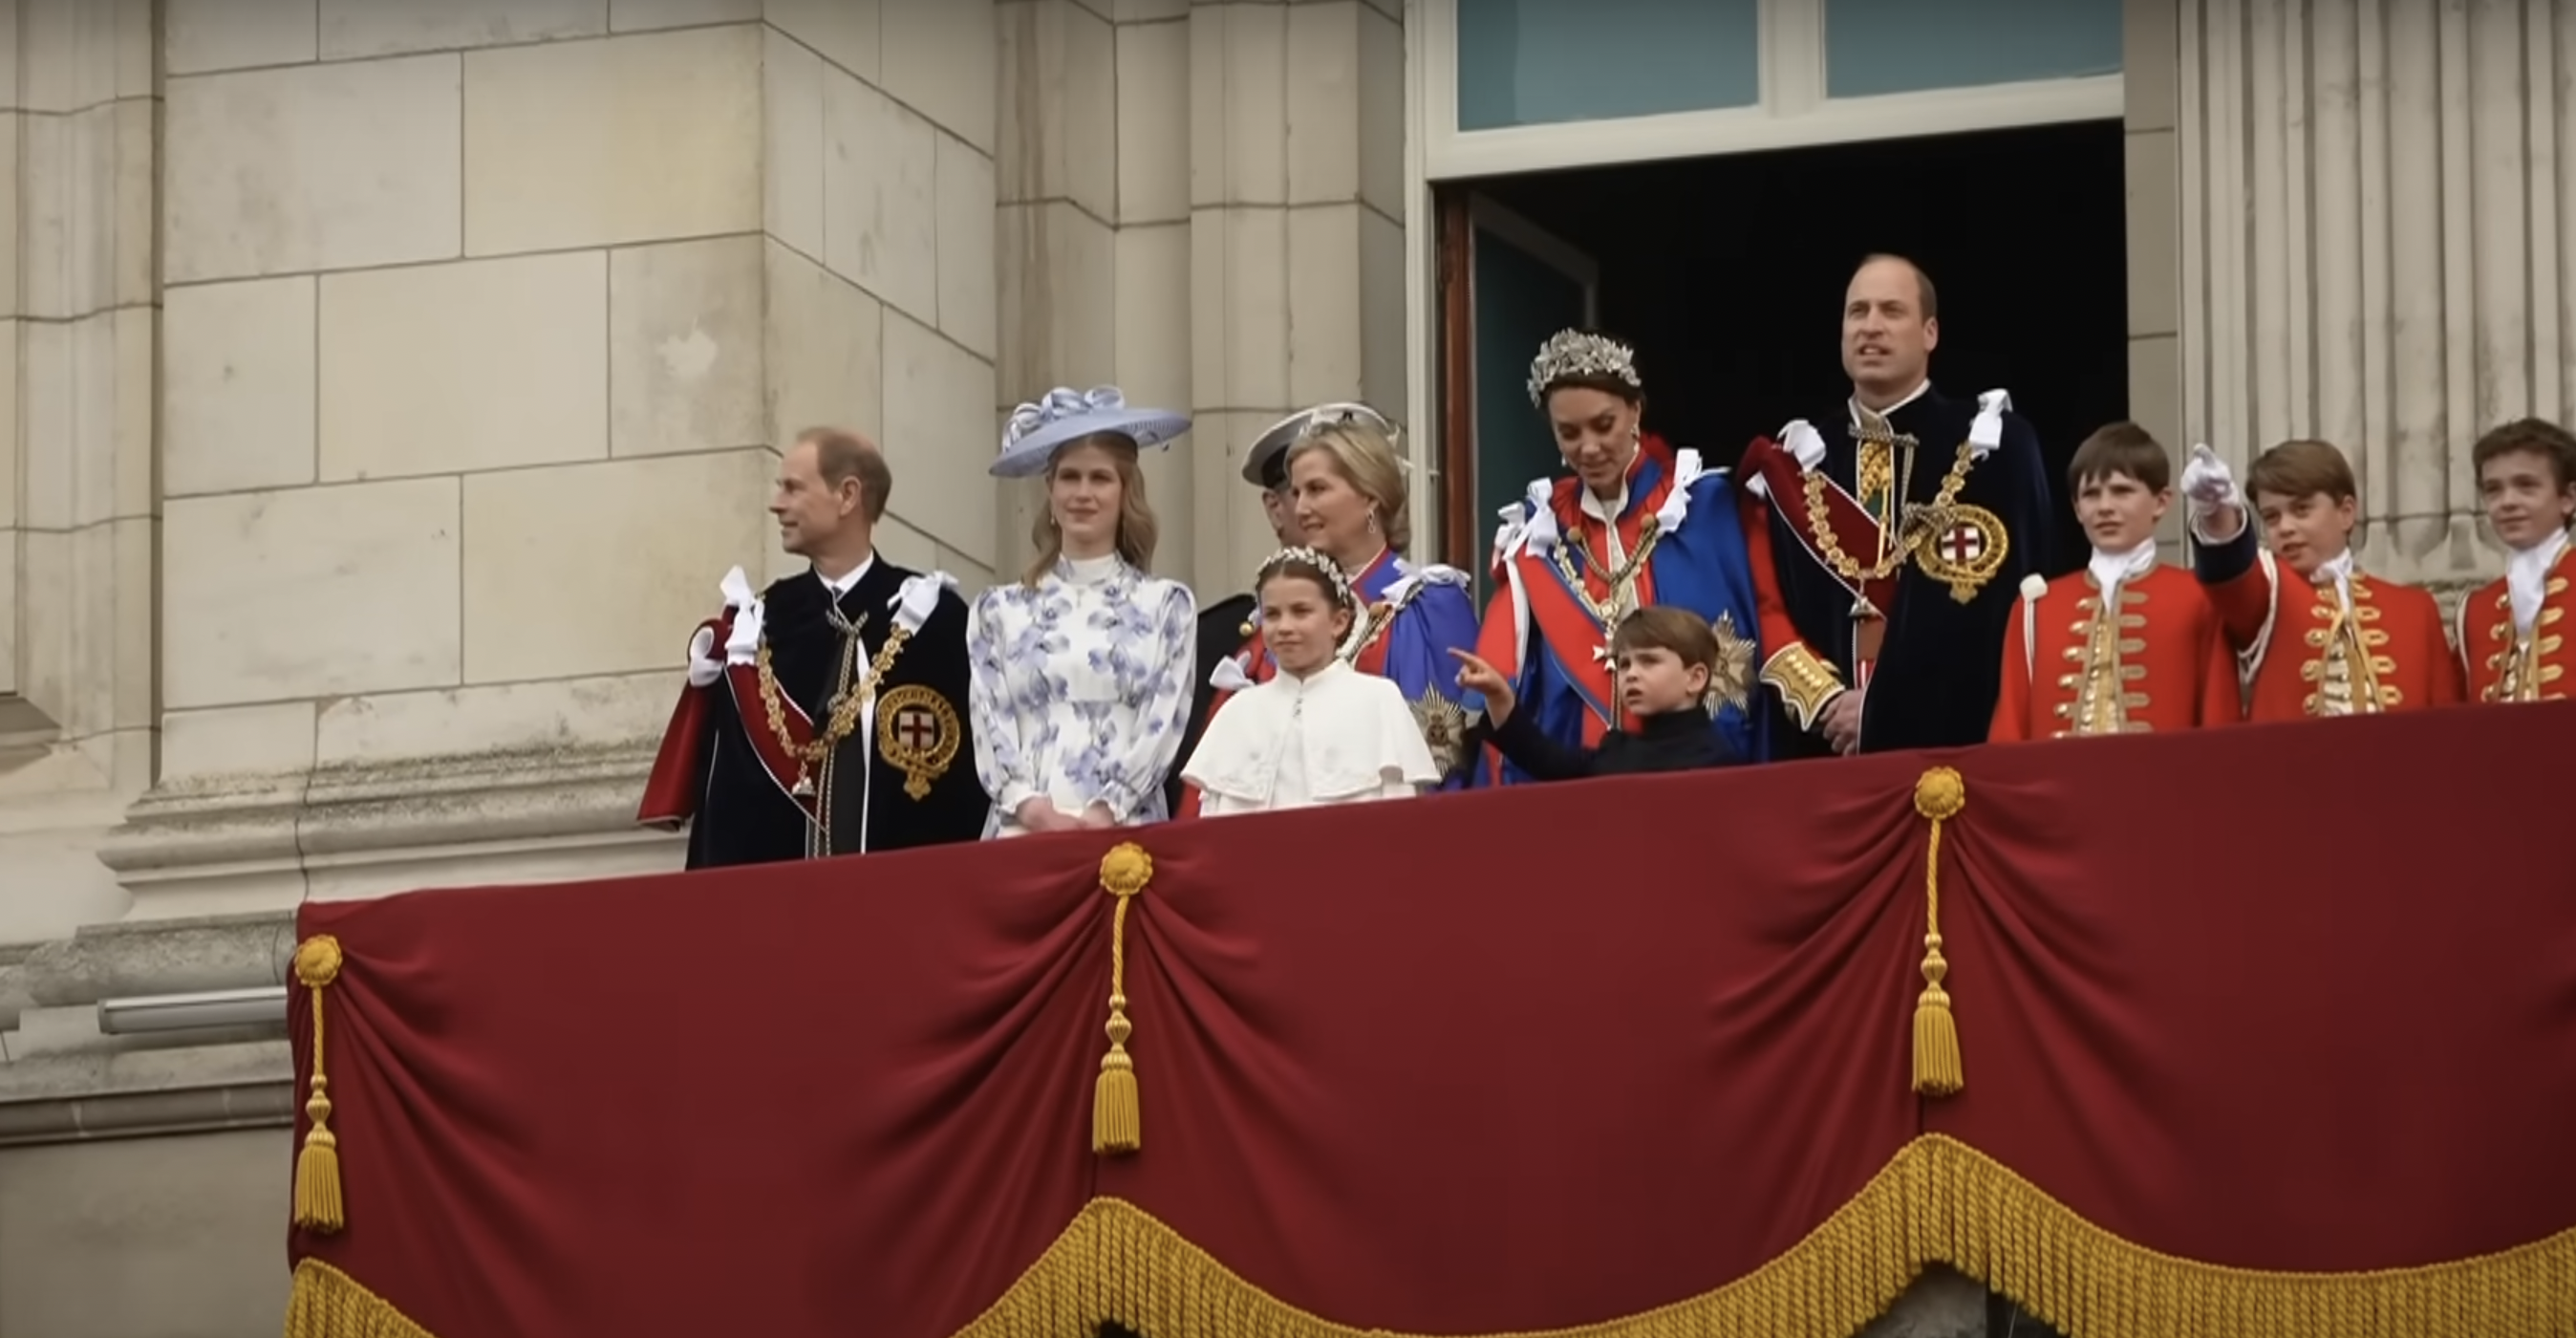 Three Royal Family Members Have Been Banned From Appearing On Palace Balcony